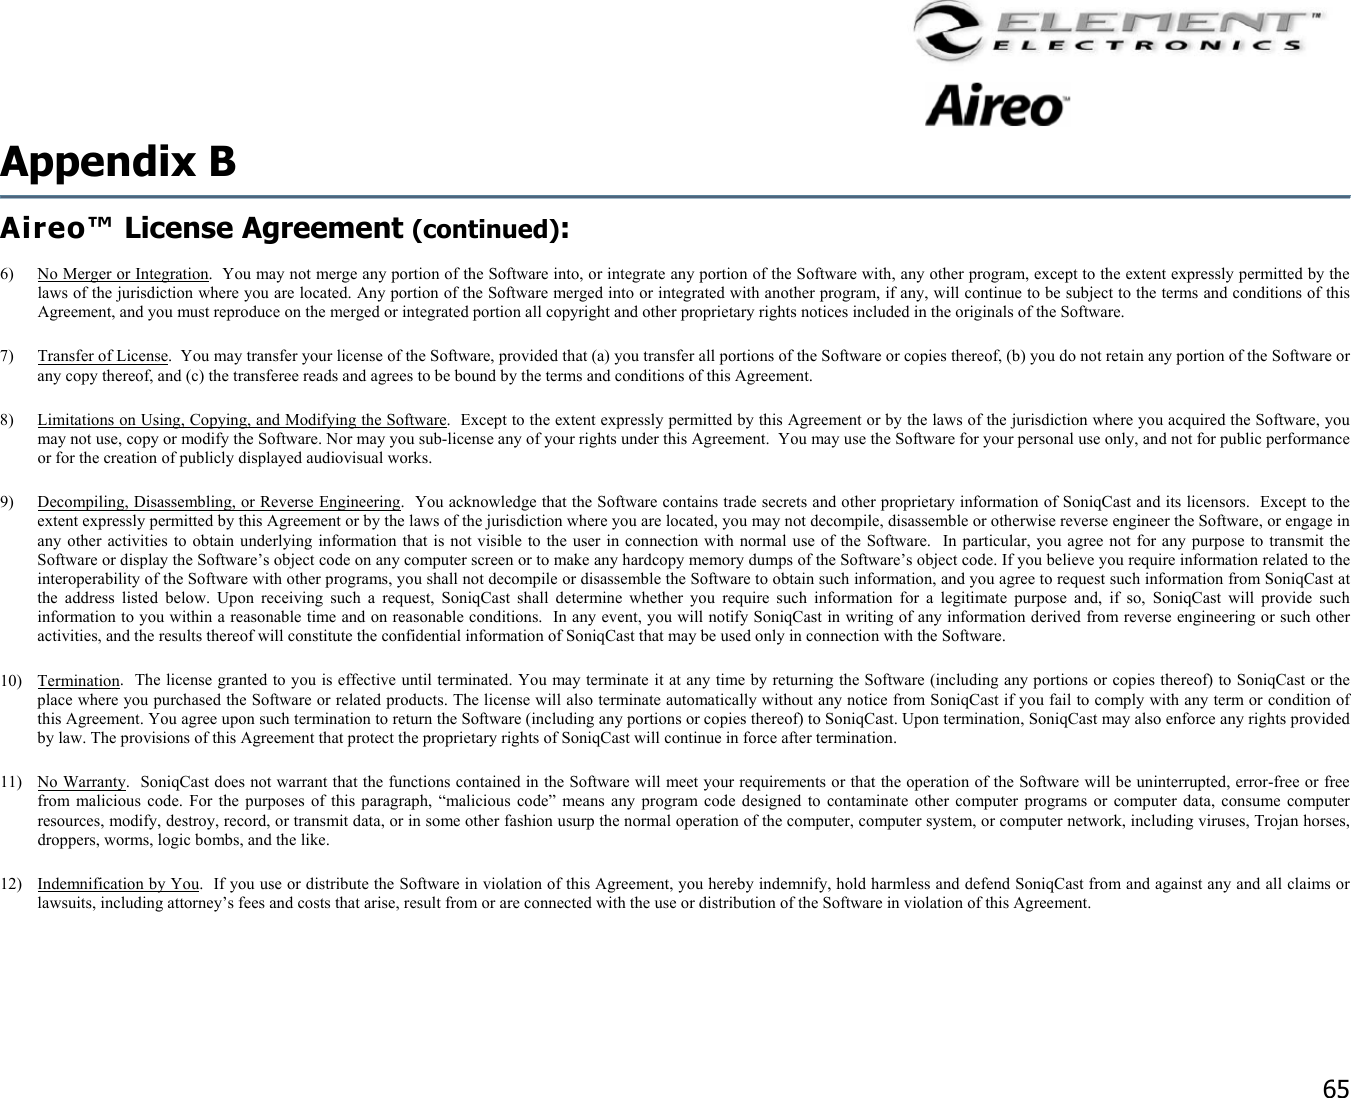                                                                                    65 Appendix B   Aireo™ License Agreement (continued):  6)  No Merger or Integration.  You may not merge any portion of the Software into, or integrate any portion of the Software with, any other program, except to the extent expressly permitted by the laws of the jurisdiction where you are located. Any portion of the Software merged into or integrated with another program, if any, will continue to be subject to the terms and conditions of this Agreement, and you must reproduce on the merged or integrated portion all copyright and other proprietary rights notices included in the originals of the Software. 7)  Transfer of License.  You may transfer your license of the Software, provided that (a) you transfer all portions of the Software or copies thereof, (b) you do not retain any portion of the Software or any copy thereof, and (c) the transferee reads and agrees to be bound by the terms and conditions of this Agreement. 8)  Limitations on Using, Copying, and Modifying the Software.  Except to the extent expressly permitted by this Agreement or by the laws of the jurisdiction where you acquired the Software, you may not use, copy or modify the Software. Nor may you sub-license any of your rights under this Agreement.  You may use the Software for your personal use only, and not for public performance or for the creation of publicly displayed audiovisual works. 9)  Decompiling, Disassembling, or Reverse Engineering.  You acknowledge that the Software contains trade secrets and other proprietary information of SoniqCast and its licensors.  Except to the extent expressly permitted by this Agreement or by the laws of the jurisdiction where you are located, you may not decompile, disassemble or otherwise reverse engineer the Software, or engage in any other activities to obtain underlying information that is not visible to the user in connection with normal use of the Software.  In particular, you agree not for any purpose to transmit the Software or display the Software’s object code on any computer screen or to make any hardcopy memory dumps of the Software’s object code. If you believe you require information related to the interoperability of the Software with other programs, you shall not decompile or disassemble the Software to obtain such information, and you agree to request such information from SoniqCast at the address listed below. Upon receiving such a request, SoniqCast shall determine whether you require such information for a legitimate purpose and, if so, SoniqCast will provide such information to you within a reasonable time and on reasonable conditions.  In any event, you will notify SoniqCast in writing of any information derived from reverse engineering or such other activities, and the results thereof will constitute the confidential information of SoniqCast that may be used only in connection with the Software. 10) Termination.  The license granted to you is effective until terminated. You may terminate it at any time by returning the Software (including any portions or copies thereof) to SoniqCast or the place where you purchased the Software or related products. The license will also terminate automatically without any notice from SoniqCast if you fail to comply with any term or condition of this Agreement. You agree upon such termination to return the Software (including any portions or copies thereof) to SoniqCast. Upon termination, SoniqCast may also enforce any rights provided by law. The provisions of this Agreement that protect the proprietary rights of SoniqCast will continue in force after termination. 11) No Warranty.  SoniqCast does not warrant that the functions contained in the Software will meet your requirements or that the operation of the Software will be uninterrupted, error-free or free from malicious code. For the purposes of this paragraph, “malicious code” means any program code designed to contaminate other computer programs or computer data, consume computer resources, modify, destroy, record, or transmit data, or in some other fashion usurp the normal operation of the computer, computer system, or computer network, including viruses, Trojan horses, droppers, worms, logic bombs, and the like.  12)  Indemnification by You.  If you use or distribute the Software in violation of this Agreement, you hereby indemnify, hold harmless and defend SoniqCast from and against any and all claims or lawsuits, including attorney’s fees and costs that arise, result from or are connected with the use or distribution of the Software in violation of this Agreement.  